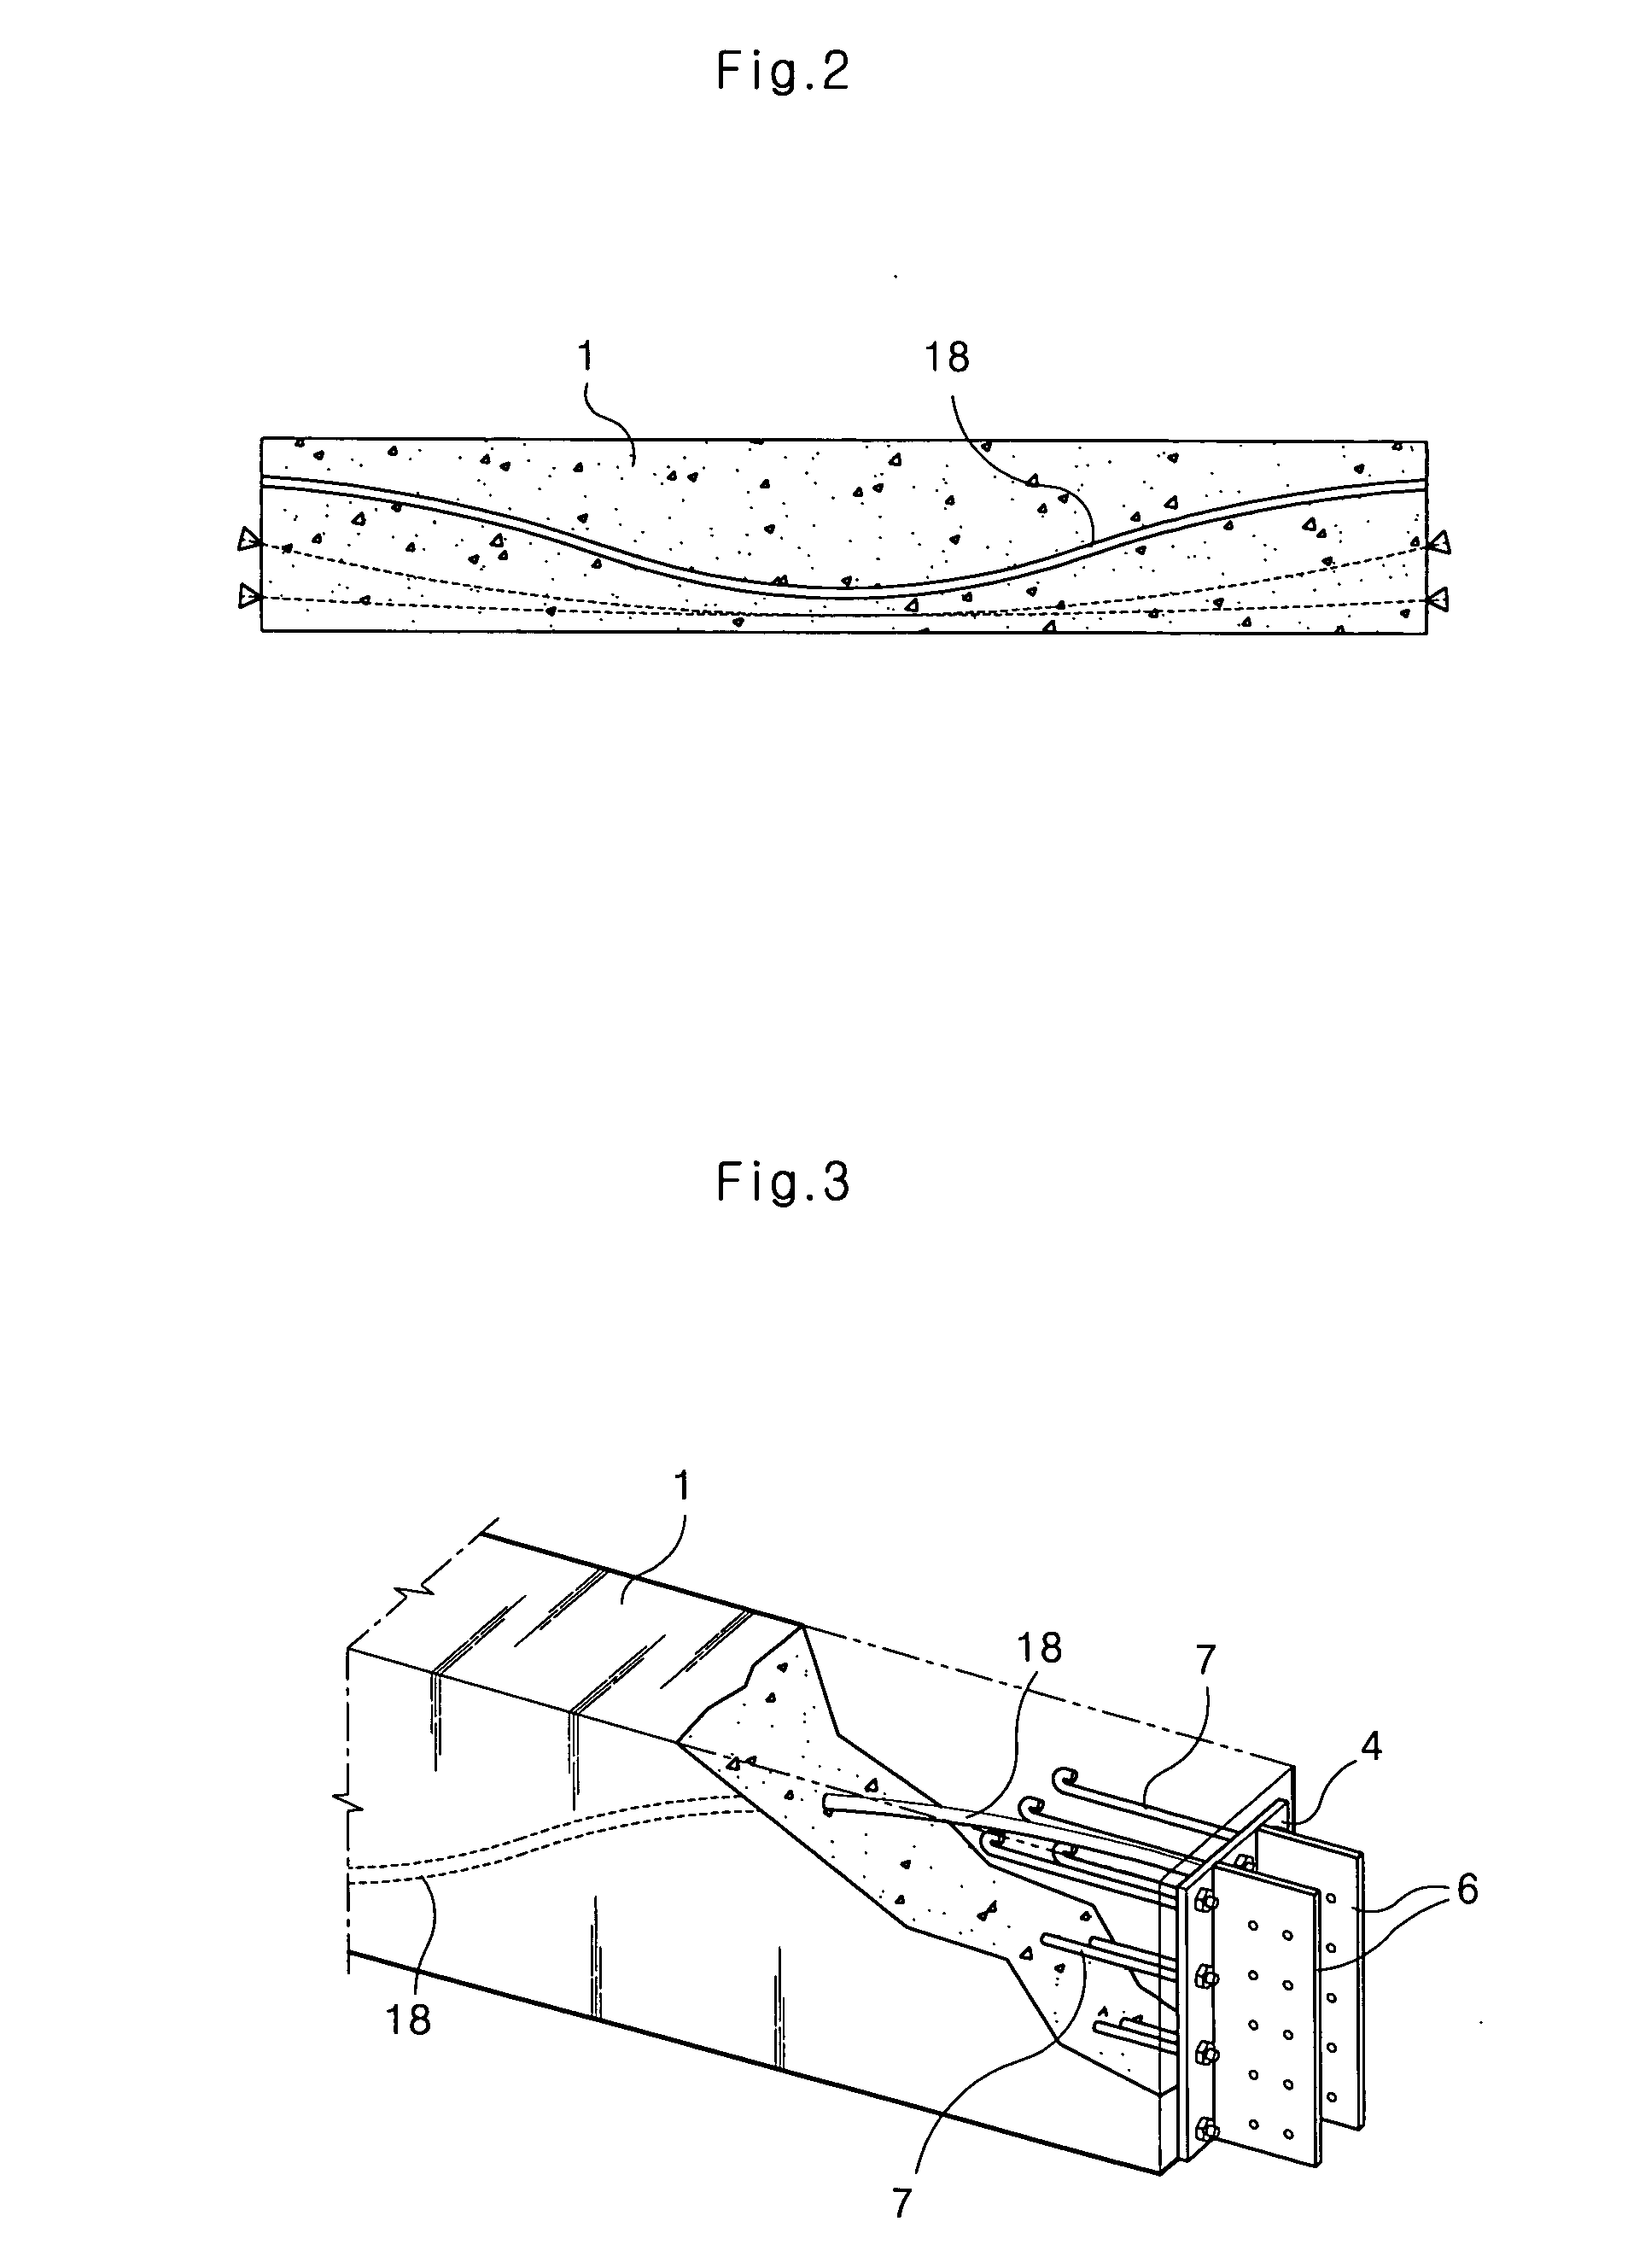 Structure and method of connecting I-type prestressed concrete beams using steel brackets